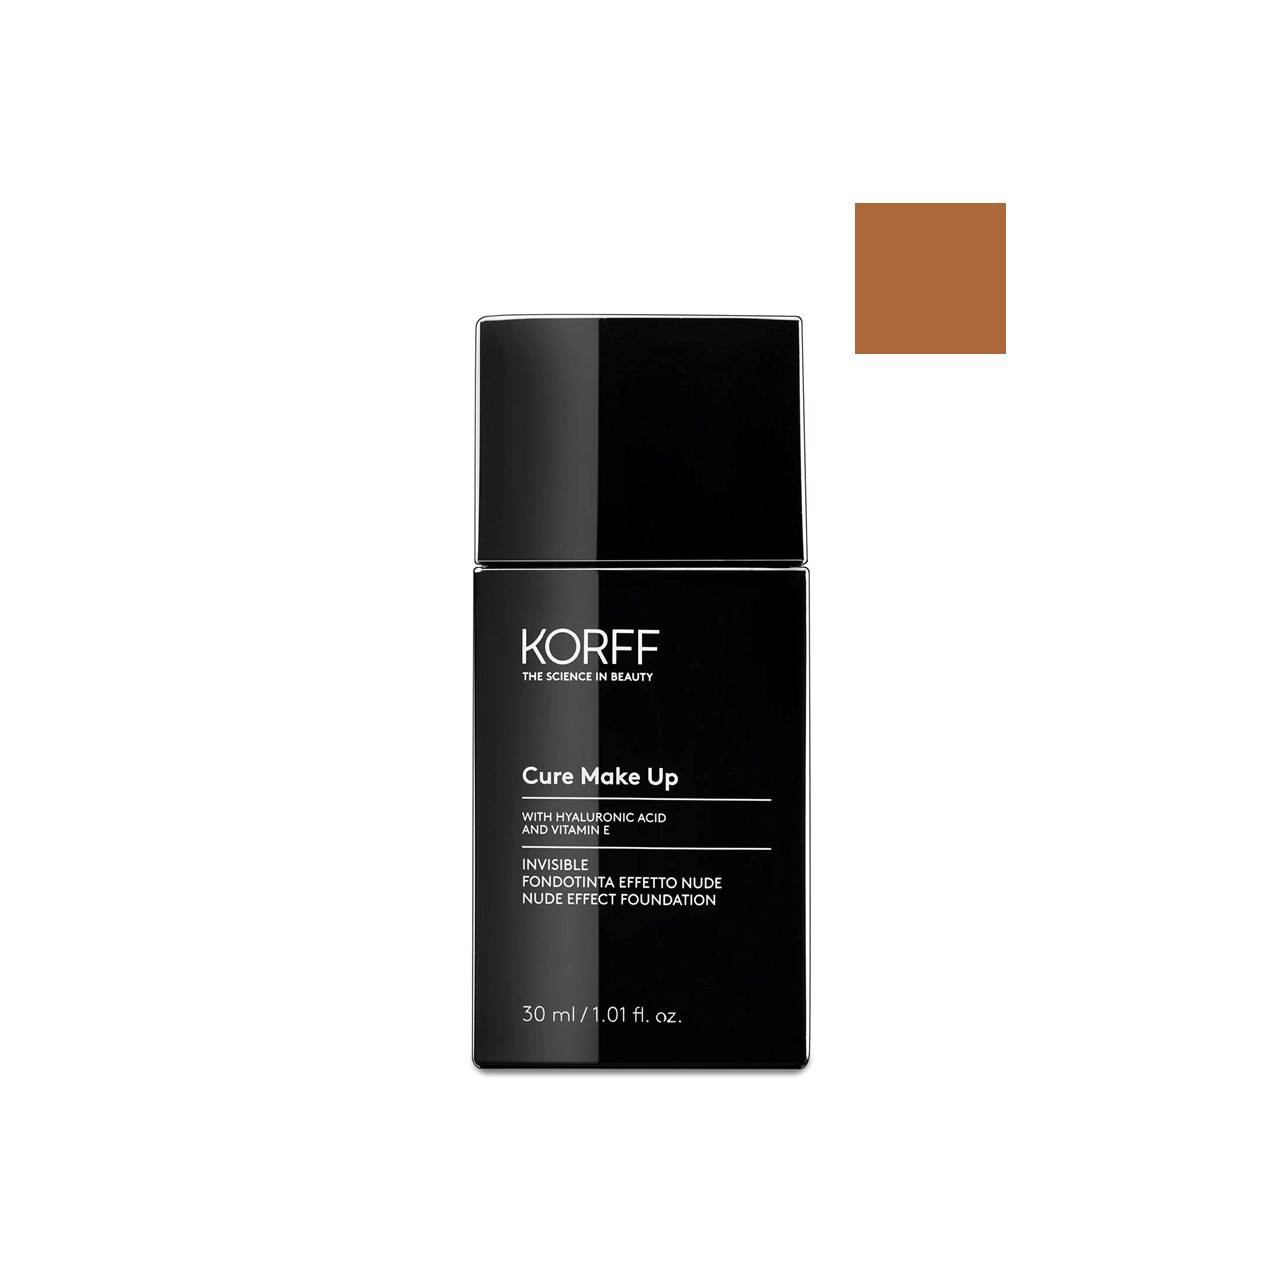 Korff Cure Make-Up Invisible Nude Effect Foundation 05 30ml (1.01 fl oz)